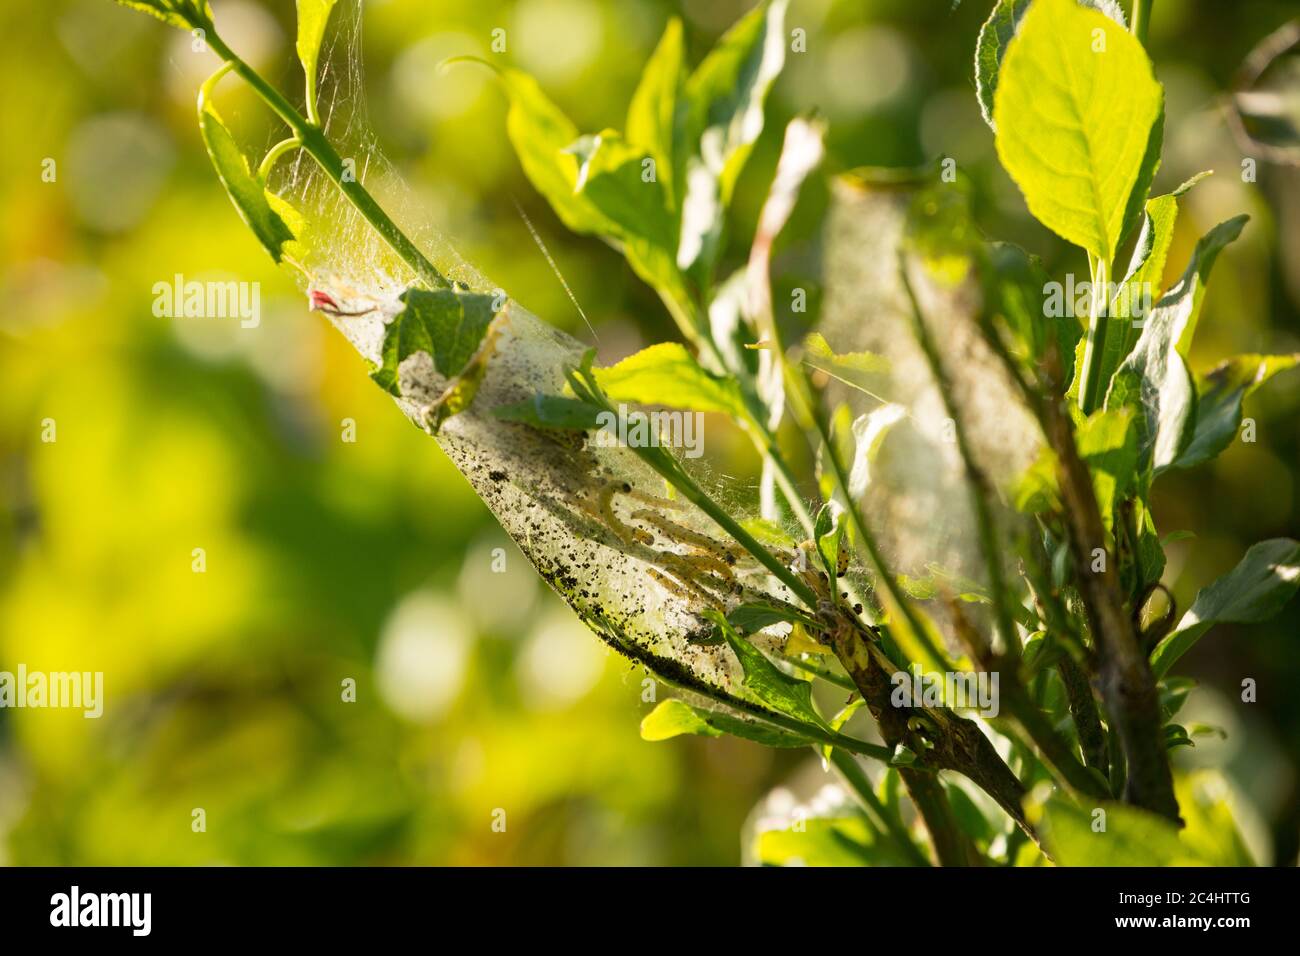 Caterpillars, or larvae, of the Spindle Ermine moth, Yponomeuta cagnagella, inside their silken web. North Dorset England UK GB Stock Photo